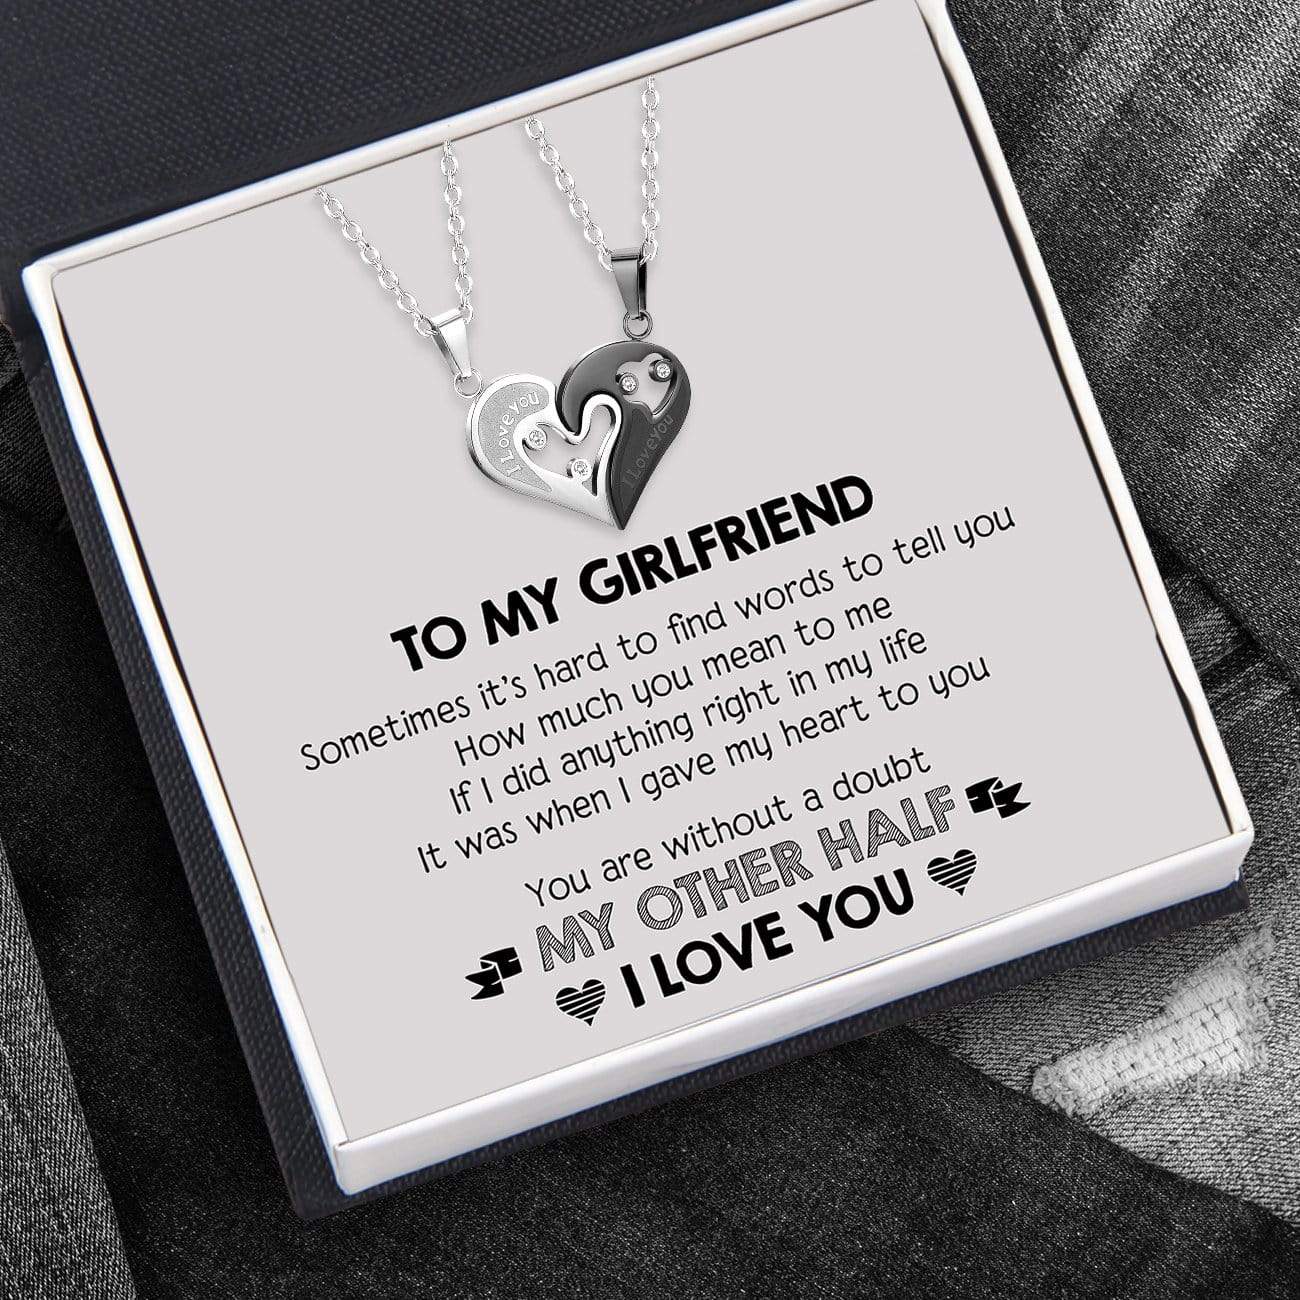 Couple Heart Necklaces - To My Girlfriend - How Much You Mean To Me - Glt13003